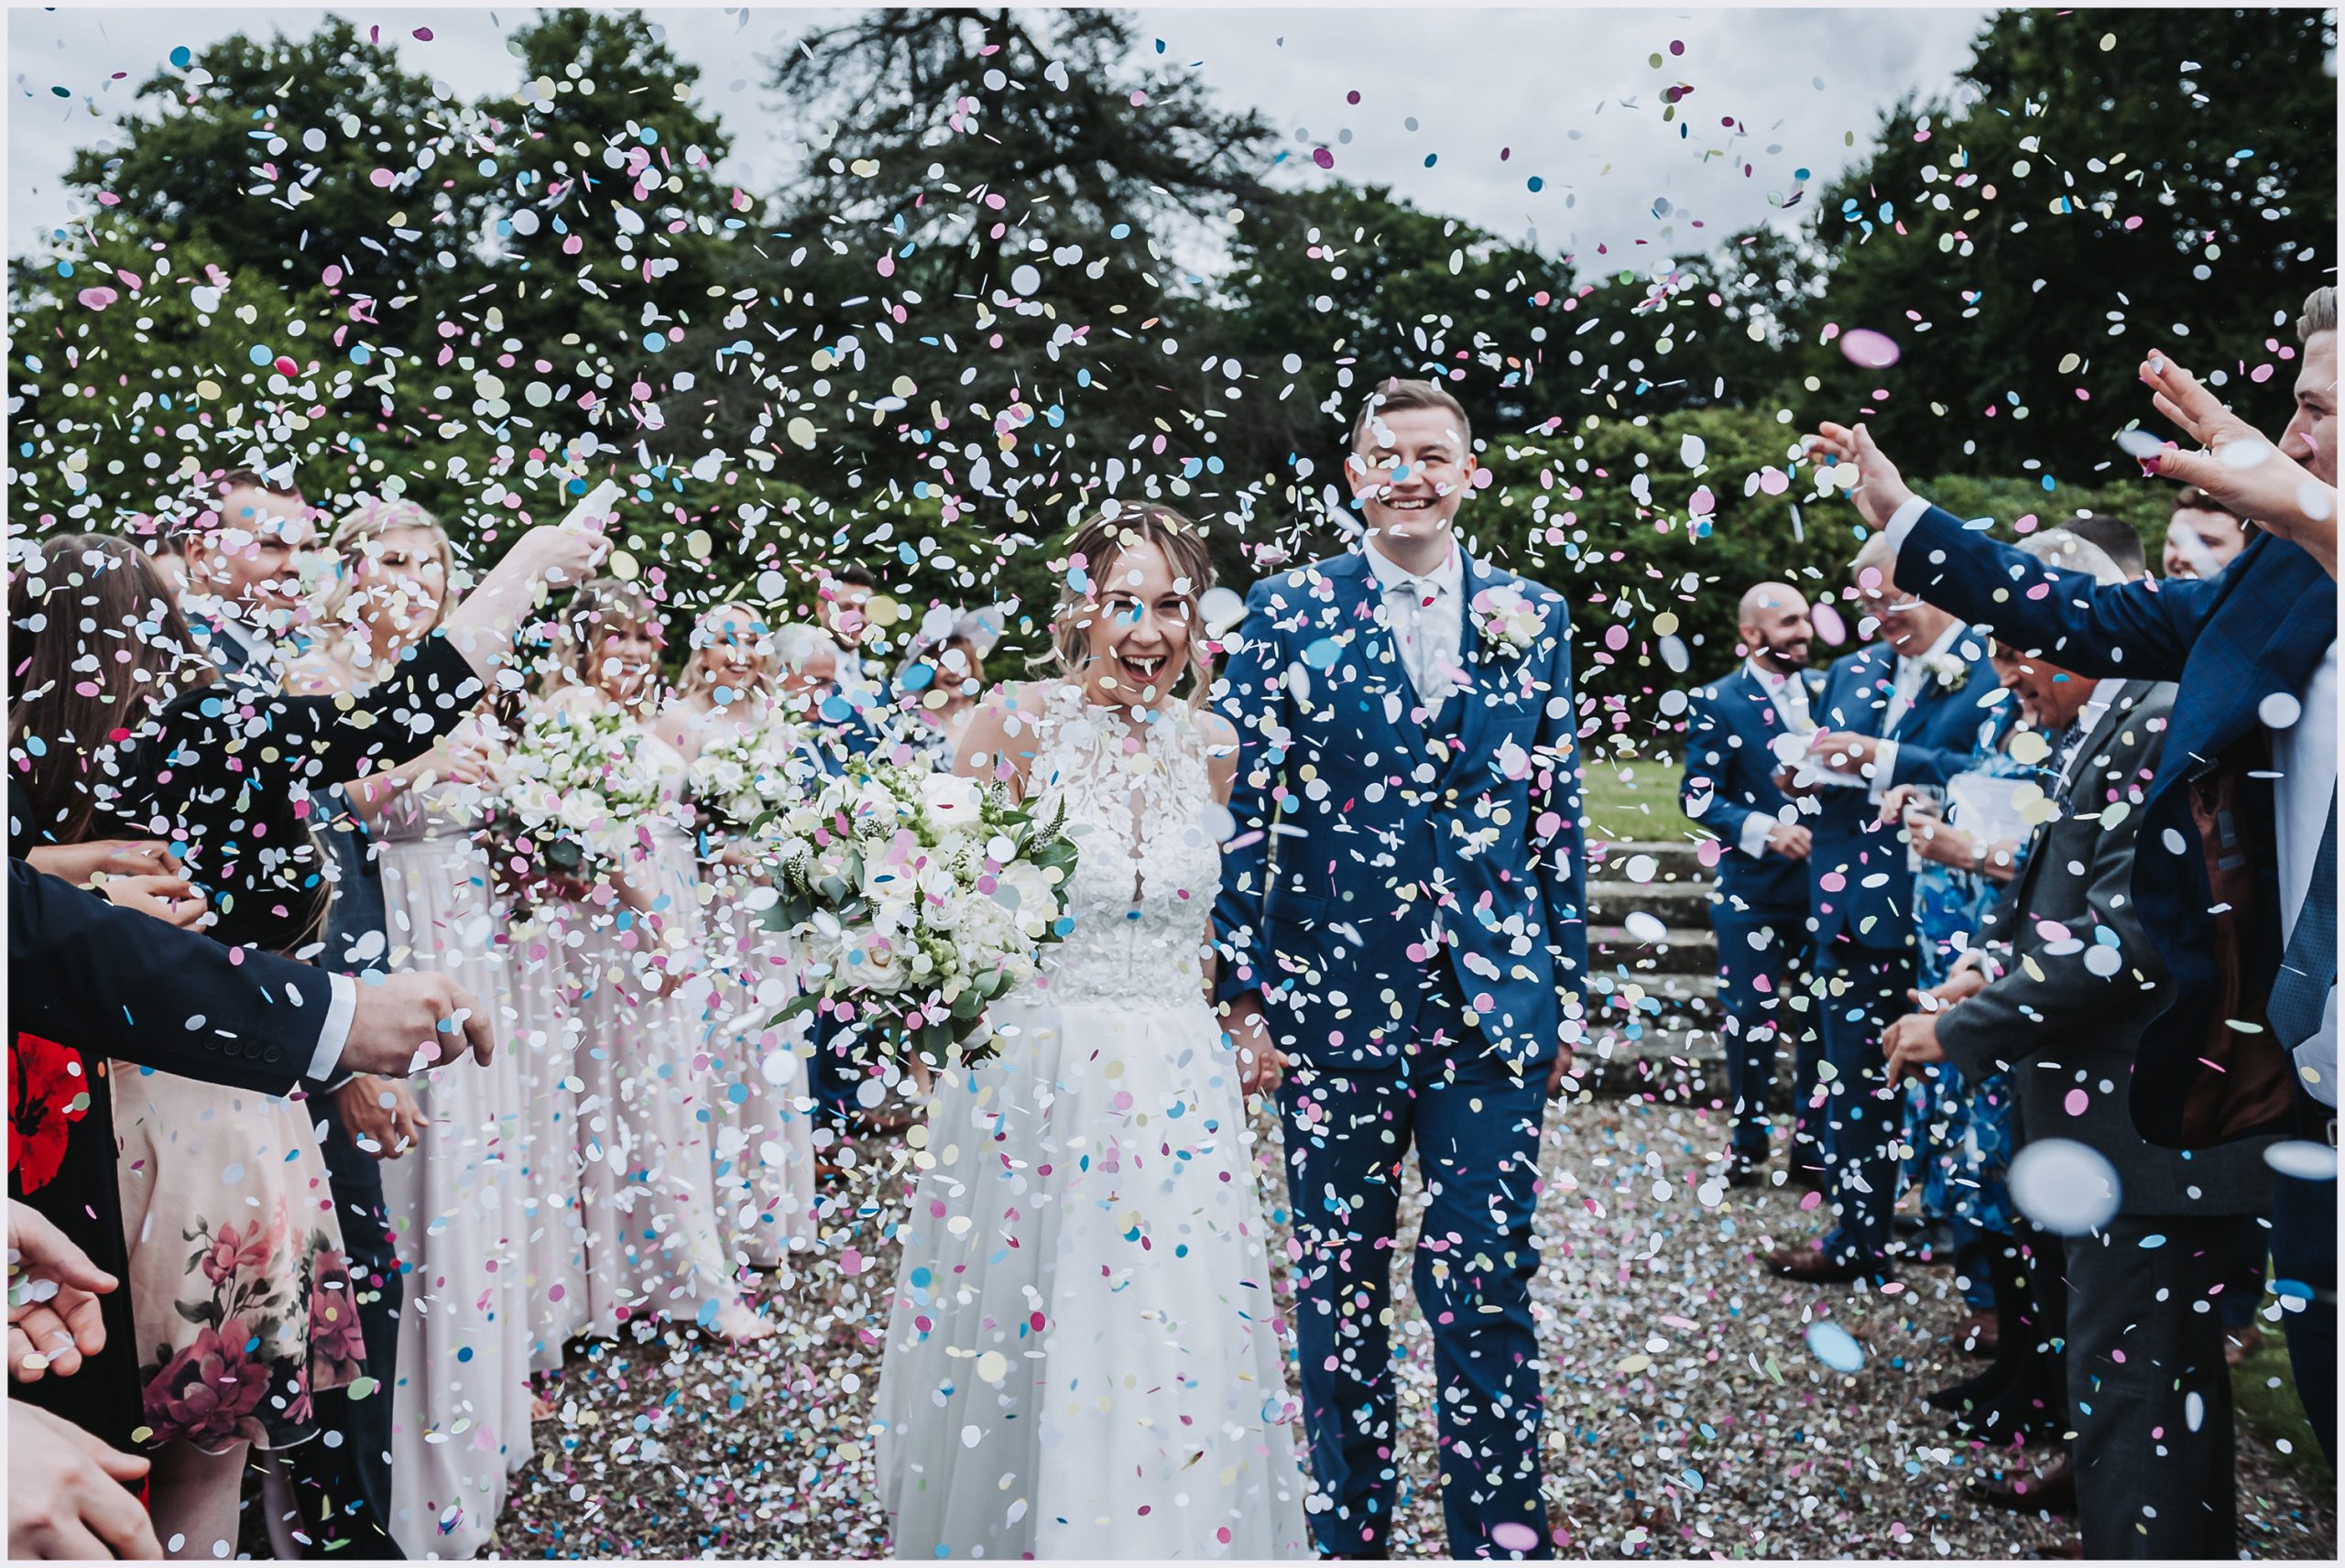 A beautiful bride and her new husband are showered in a lot of confetti after their wedding ceremony at Willington Hall Hotel.  Image captured by Cheshire Wedding Photographer Helena Jayne Photography